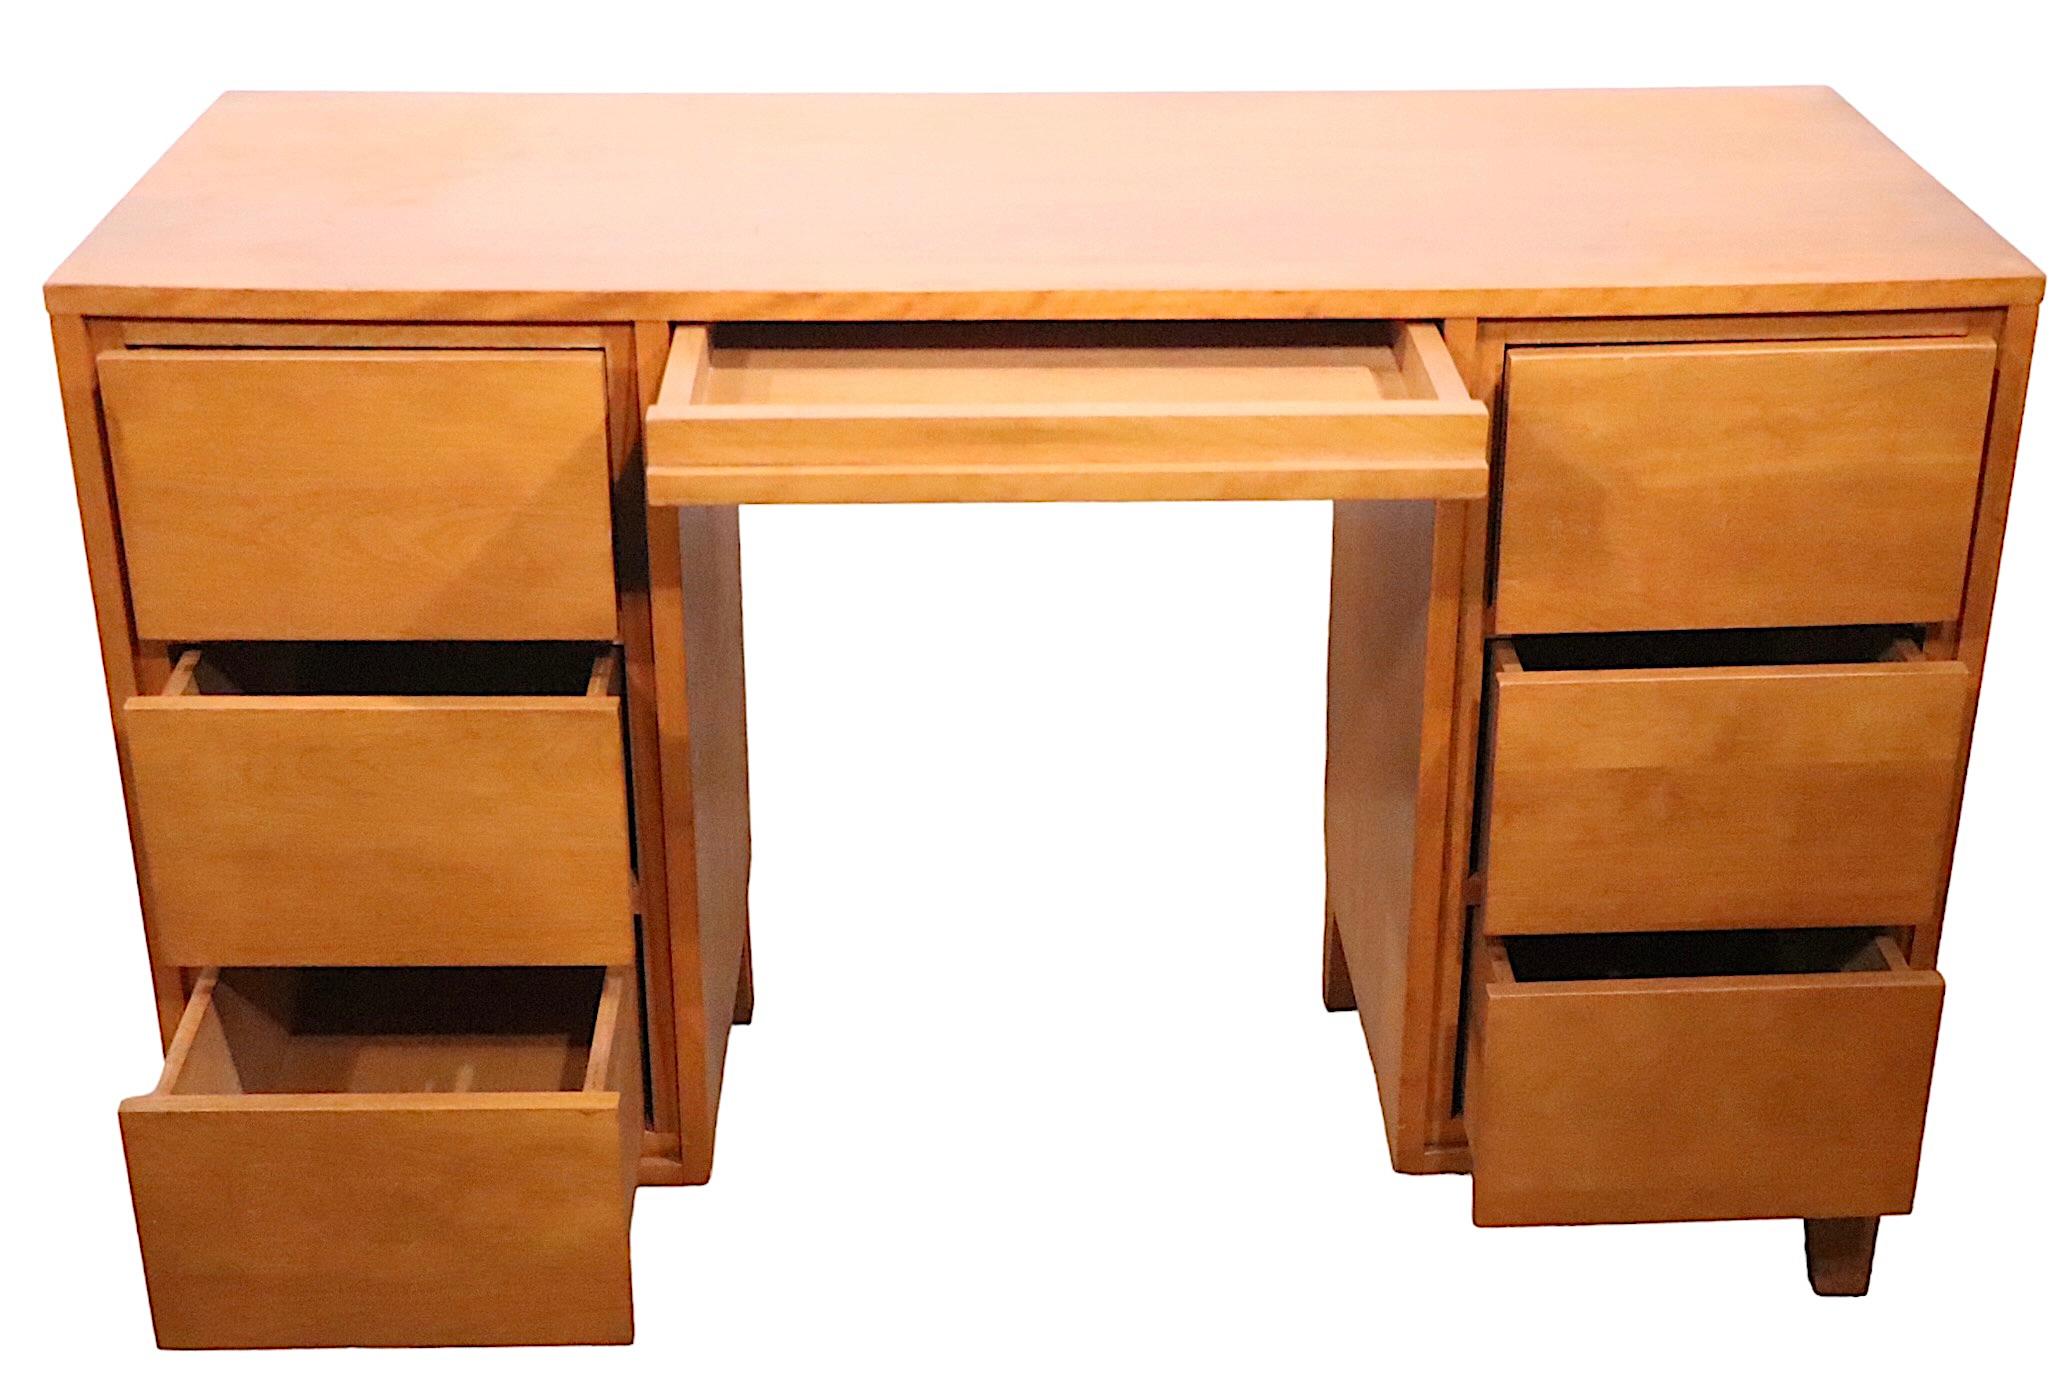 Architectural Mid Century desk, with original chair, designed by Leslie Diamond, for Conant Ball, as part of their hugely successful Modern Mates series.  This piece is constructed of solid wood, the drawers are all fully functional and work